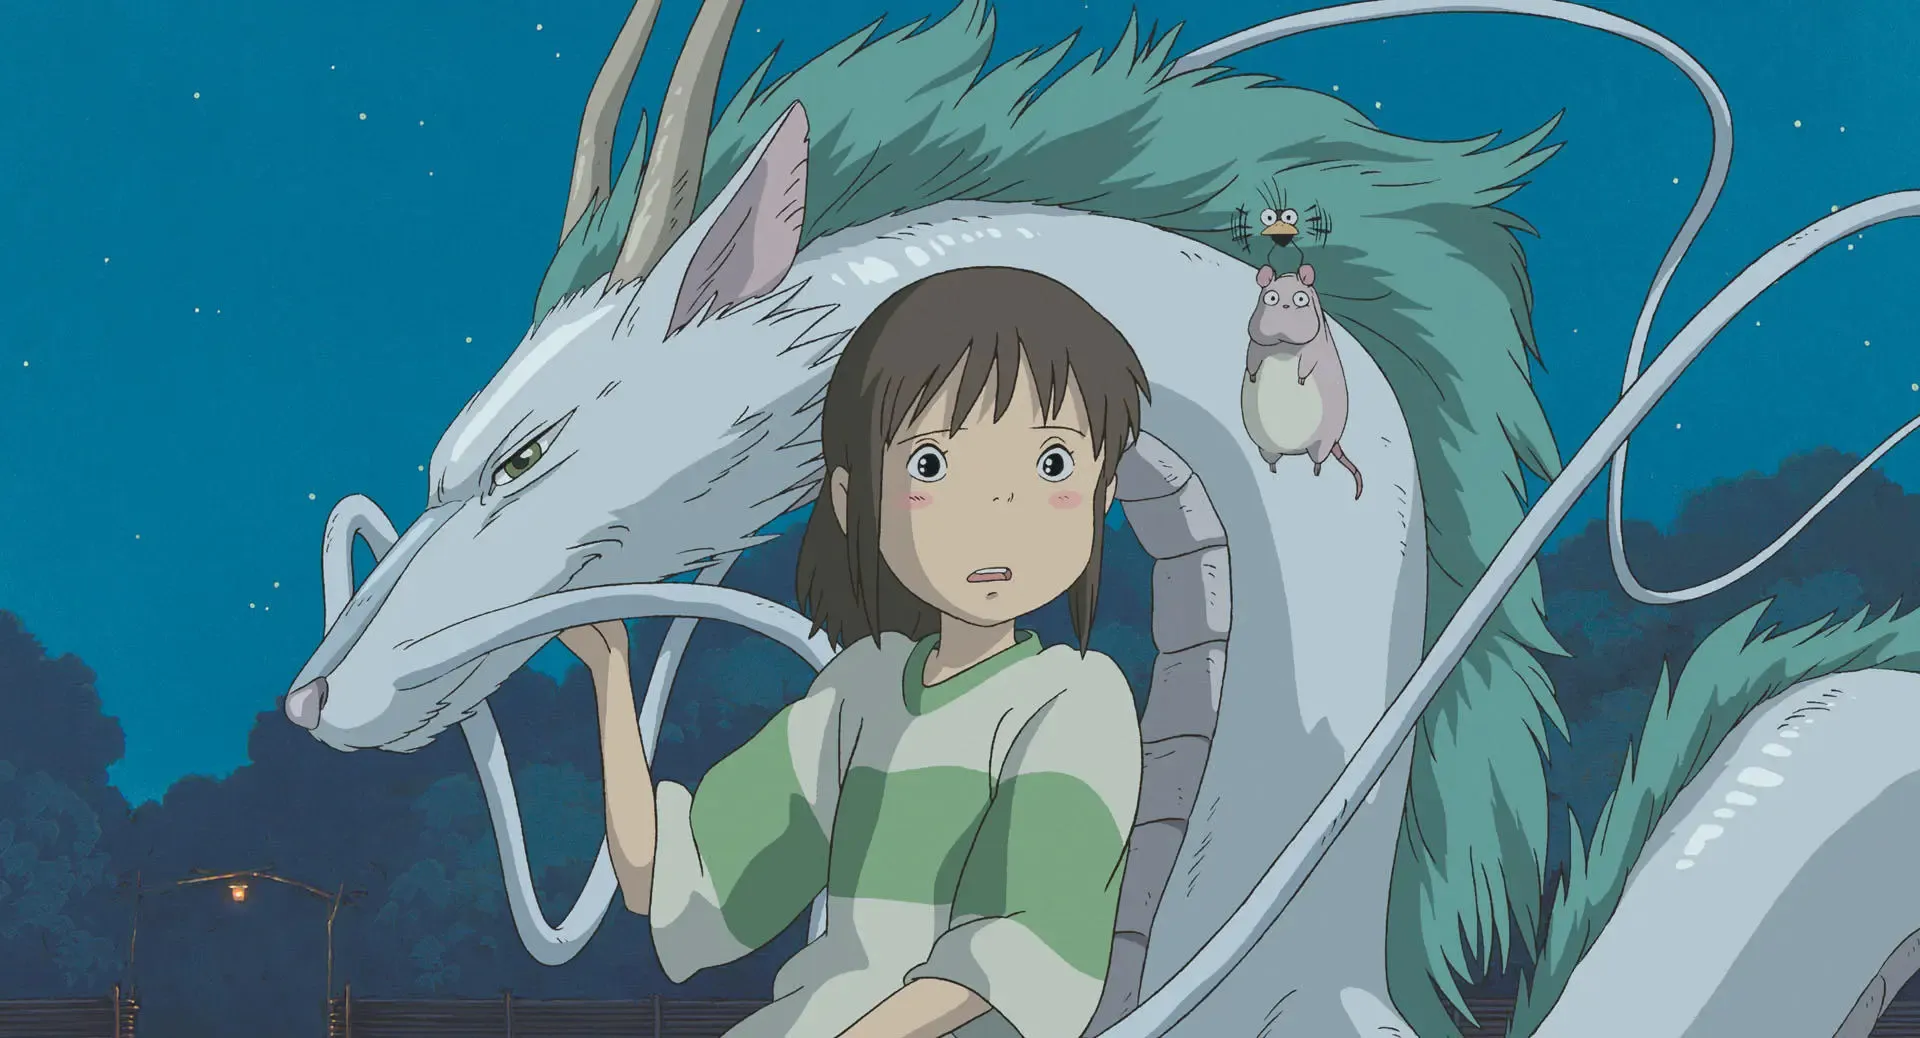 Hayao Miyazaki Movies Ranked from Worst to Best – IndieWire